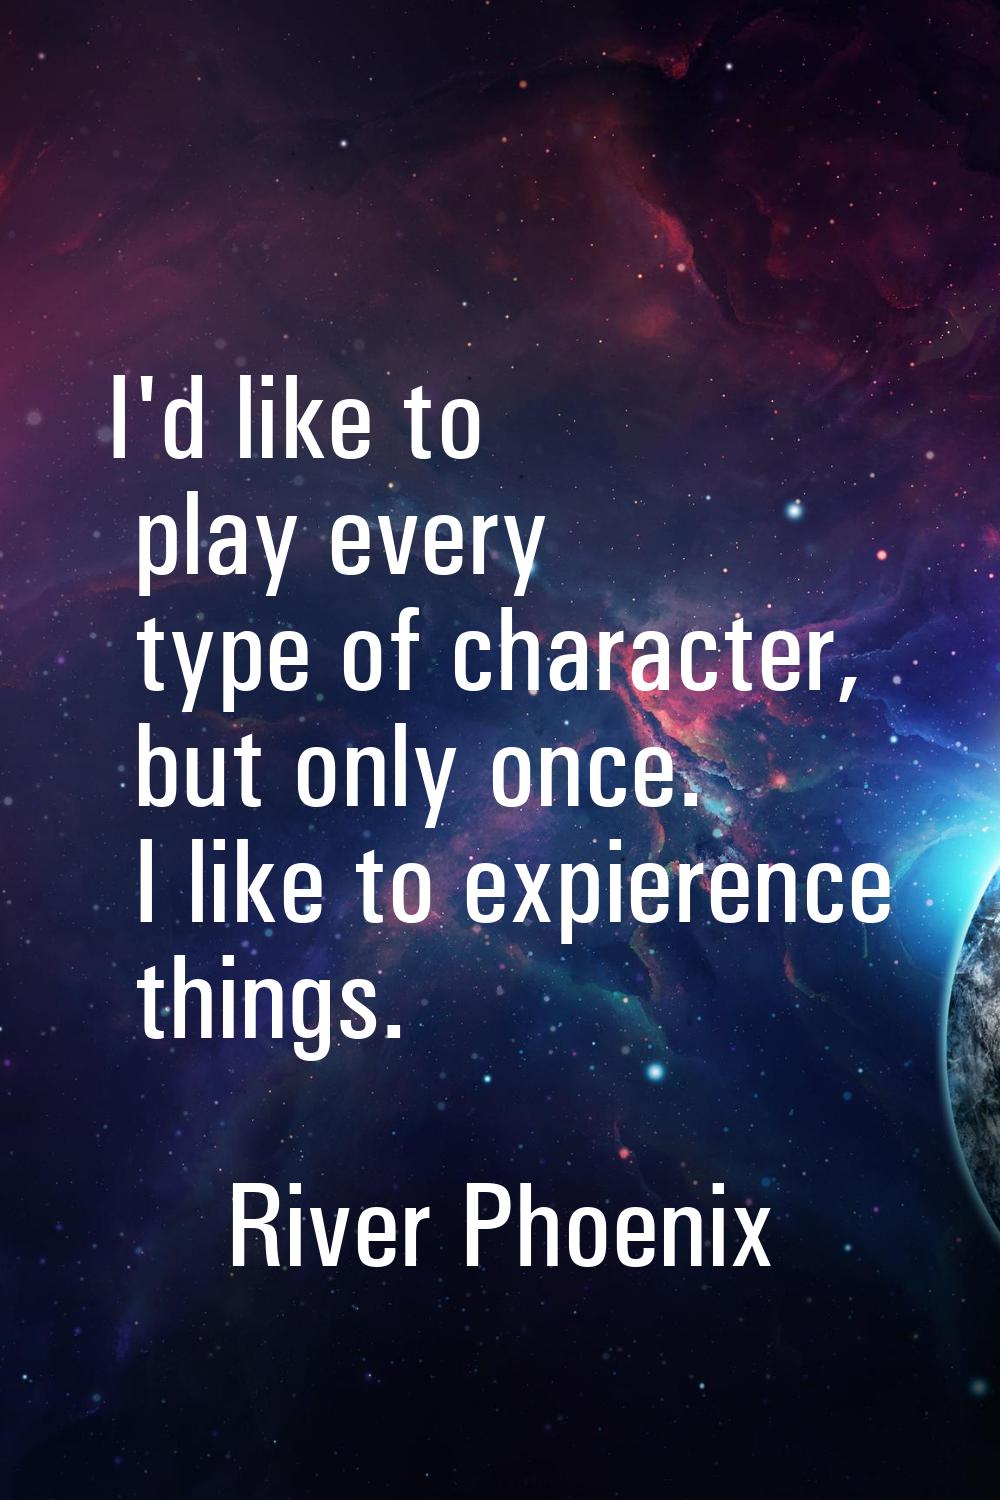 I'd like to play every type of character, but only once. I like to expierence things.